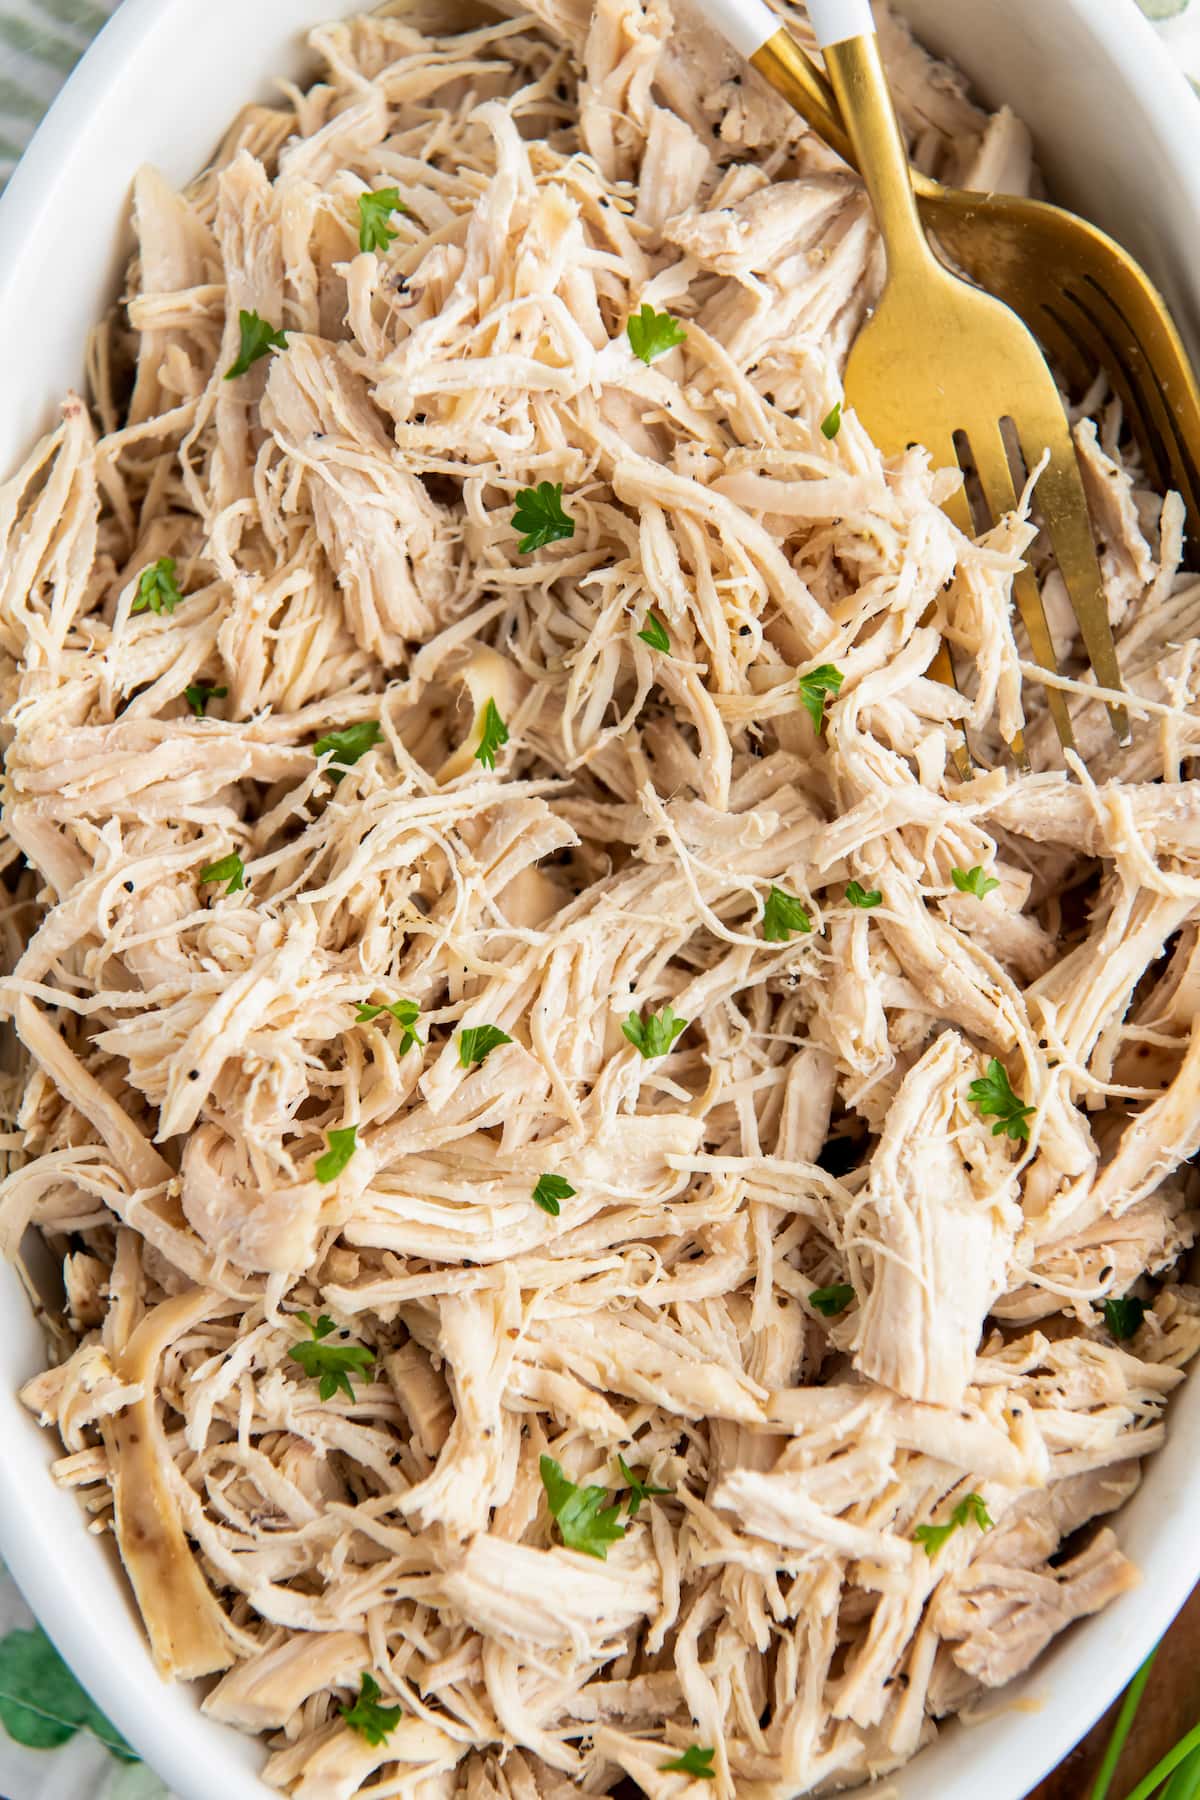 shredded chicken with chopped fresh herbs mixed in